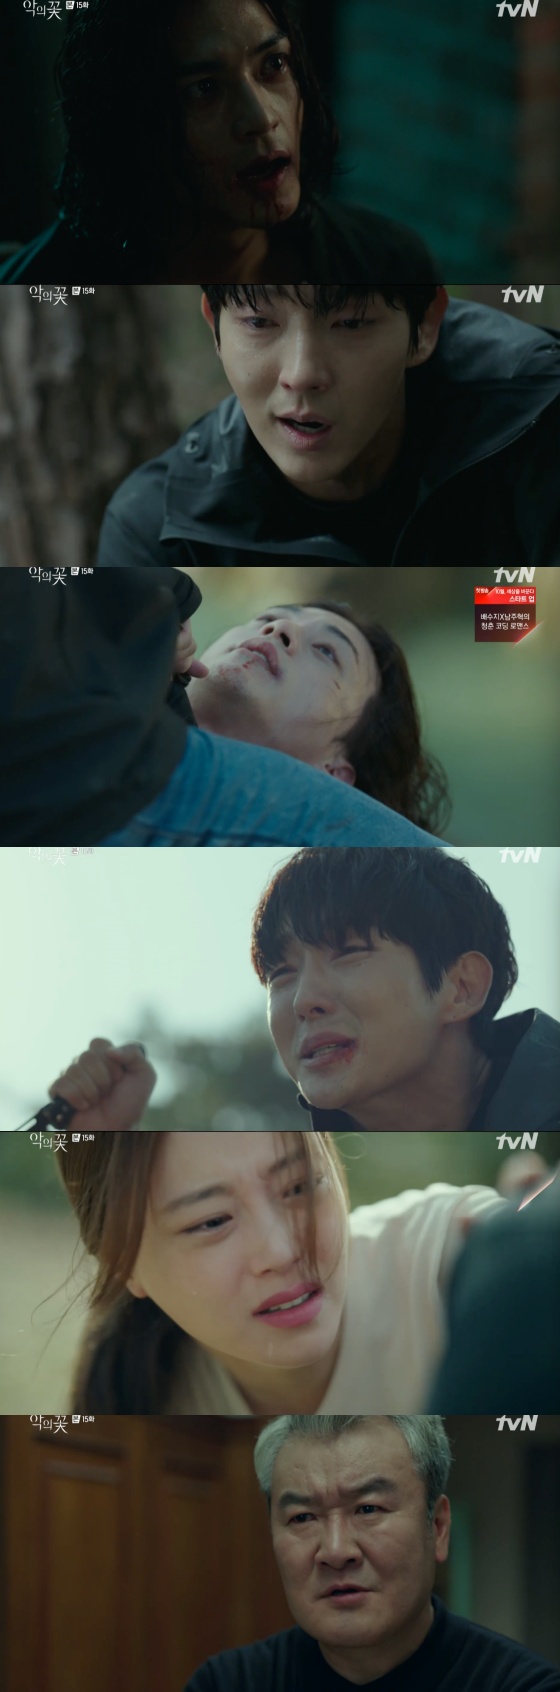 In Flower of Evil, Lee Joon-gi was shot by Kim Ji-hoon instead of Moon Chae-won and fell unconscious.In the TVN tree drama The Flower of Evil, which was broadcast on the afternoon of the 17th, there was a scene where Do Hyun-soo (Lee Joon-gi) played the last round of battle with Baek Hee-seong (Kim Ji-hoon).Do Hyun-soo lured Baek Hee-seong to a warehouse with Jung Mi-sook (Han Soo-yeon), the victim and only survivor of the serial murder in the performance.Do Hyun-soo tied the Baek Hee-seong to a chair after surprise as the Baek Hee-seong arrived.Baek Hee-seong continued to provoke Do Hyun-soo.Baek Hee-seong expressed his anger at Do Hyun-soo, believing that Do Min-seok (Choi Byung-mo), the father of Do Hyun-soo, was the reason he became a murderer.However, Do Hyun-soo did not fall under the provocation of Baek Hee-seong.But Do Hyun-soo soon lost his temper.The discovery of Cha JiWons police officers ID card in the pocket of Baek Hee-seong: Give me that ID back.Its my souvenir, he said, provoking again.Baek Hee-seong misunderstood Do Hae-su (Jang Hee-jin), who came to pack his luggage while lurking in Cha JiWons house, as Cha JiWon, and had come out with a Cha JiWon police officers ID after stabbing Do Hae-su.An angry Do Hyun-soo ran to the Baek Hee-seong with a knife, but the Baek Hee-seong ran away.Cha JiWon then appeared when Do Hyun-soo followed Baek Hee-seong and tried to stab him with a knife.Cha JiWon stopped Do Hyun-soo, but Do Hyun-soo said, I can not believe the person in front of me now.Cha JiWon continued to persuade Do Hyun-soo, and eventually Do Hyun-soo abandoned the knife and headed to Cha JiWon.Then, Baek Hee-Seong took the gun from the police and shot Cha JiWon, and Do Hyun-soo was shot and unconscious instead of Cha JiWon.The story of Baek Man-woo (Son Jong-hak) and Kong Mi-ja (Nam Ki-ae) was also revealed on the day.Baek Man-u threatened Kim Moo-jin (Seo Hyun-woo), who noticed that Baek Hee-seong had taken consciousness, with a drug-containing syringe.Kim Moo-jin said, Whats different about this? But Baek Man-u said, Shell be different. If I make a sacrifice, itll be different. She wasnt like that.I would not have done it if I had not met Do Min-seok. I want to give her one more chance.It was the moment when the reality of the million-woo who knew the evil of his son and turned away, rather, committed a bigger evil act was revealed.